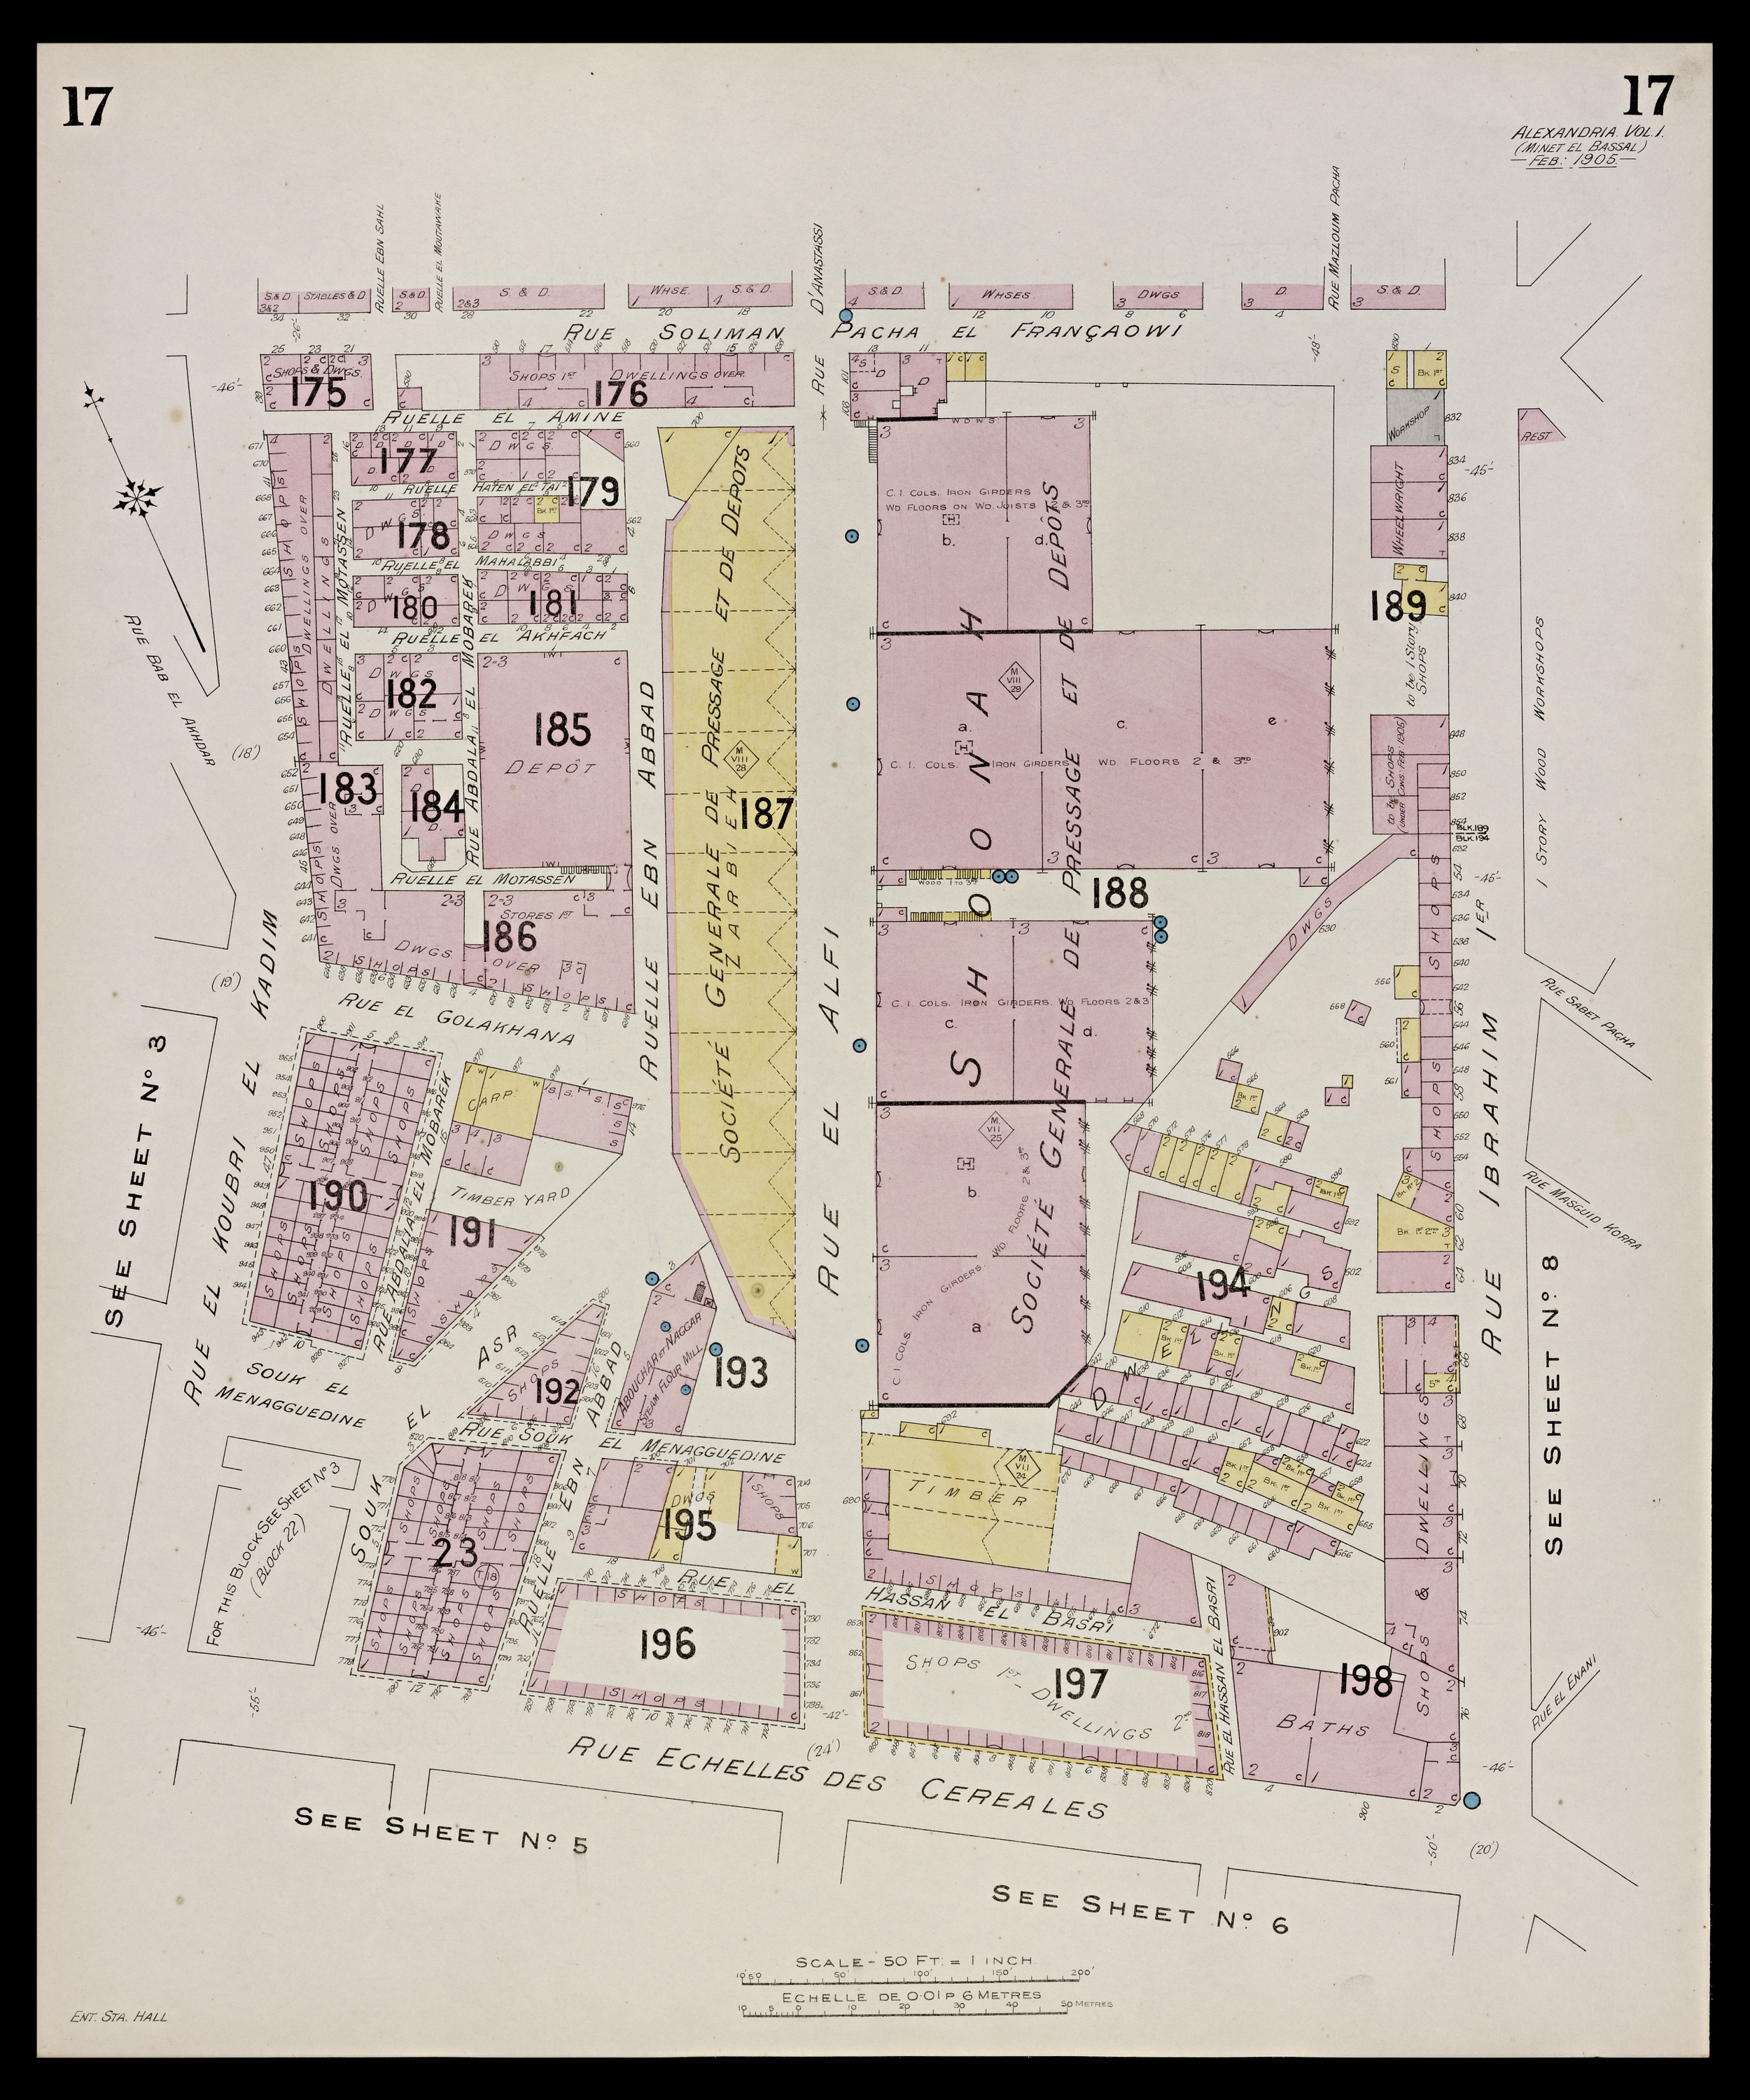 Alexandria  - A sheet from the&nbsp;<span style="font-style: italic;">Insurance Plan of Alexandria</span>. The complete set of plans can be found on&nbsp;<a href="https://www.archnet.org/publications/10217/" target="_blank" data-bypass="true">Archnet</a>, or as georeferenced versions in the&nbsp;<a href="http://calvert.hul.harvard.edu:8080/opengeoportal/openGeoPortalHome.jsp?BasicSearchTerm=ExternalLayerId:1203" target="_blank" data-bypass="true">Harvard Geospatial Library</a>.